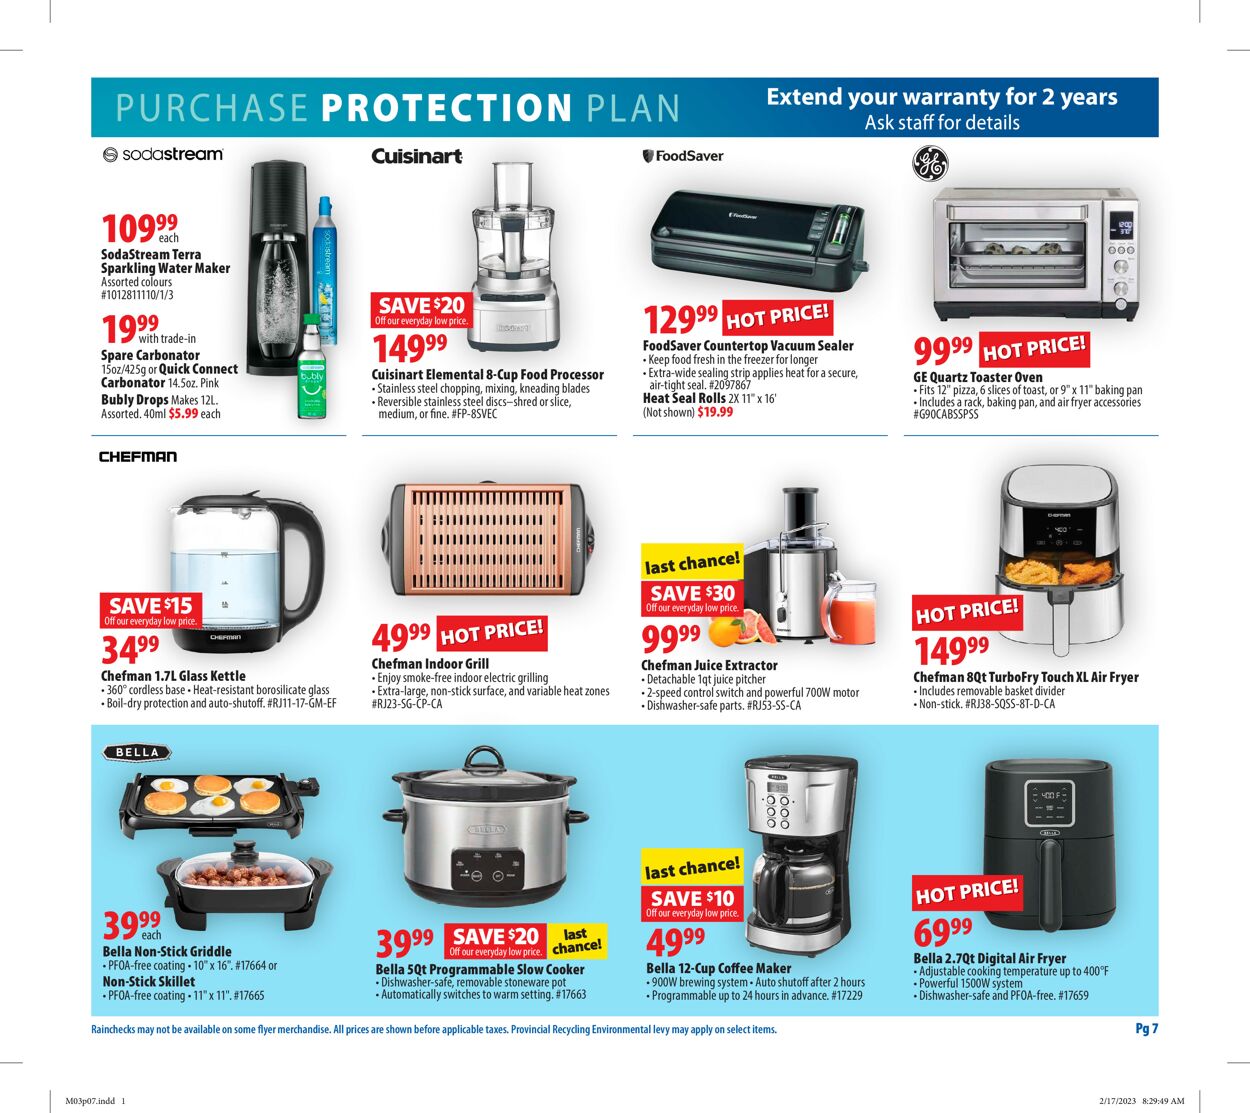 London Drugs Flyer from 03/03/2023